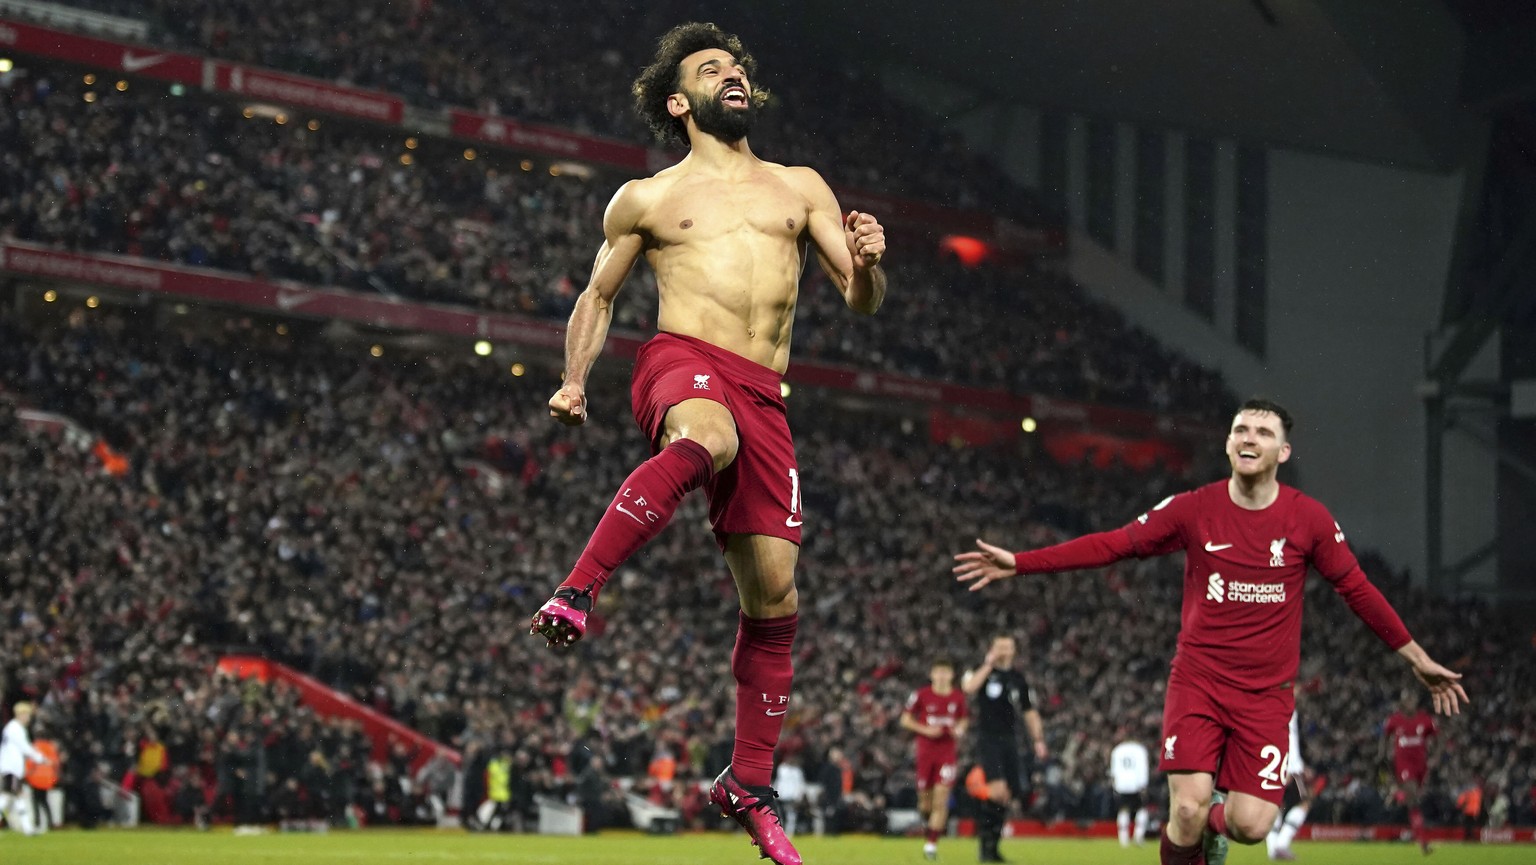 Liverpool&#039;s Mohamed Salah celebrates after scoring his side&#039;s sixth goal during the English Premier League soccer match between Liverpool and Manchester United at Anfield in Liverpool, Engla ...